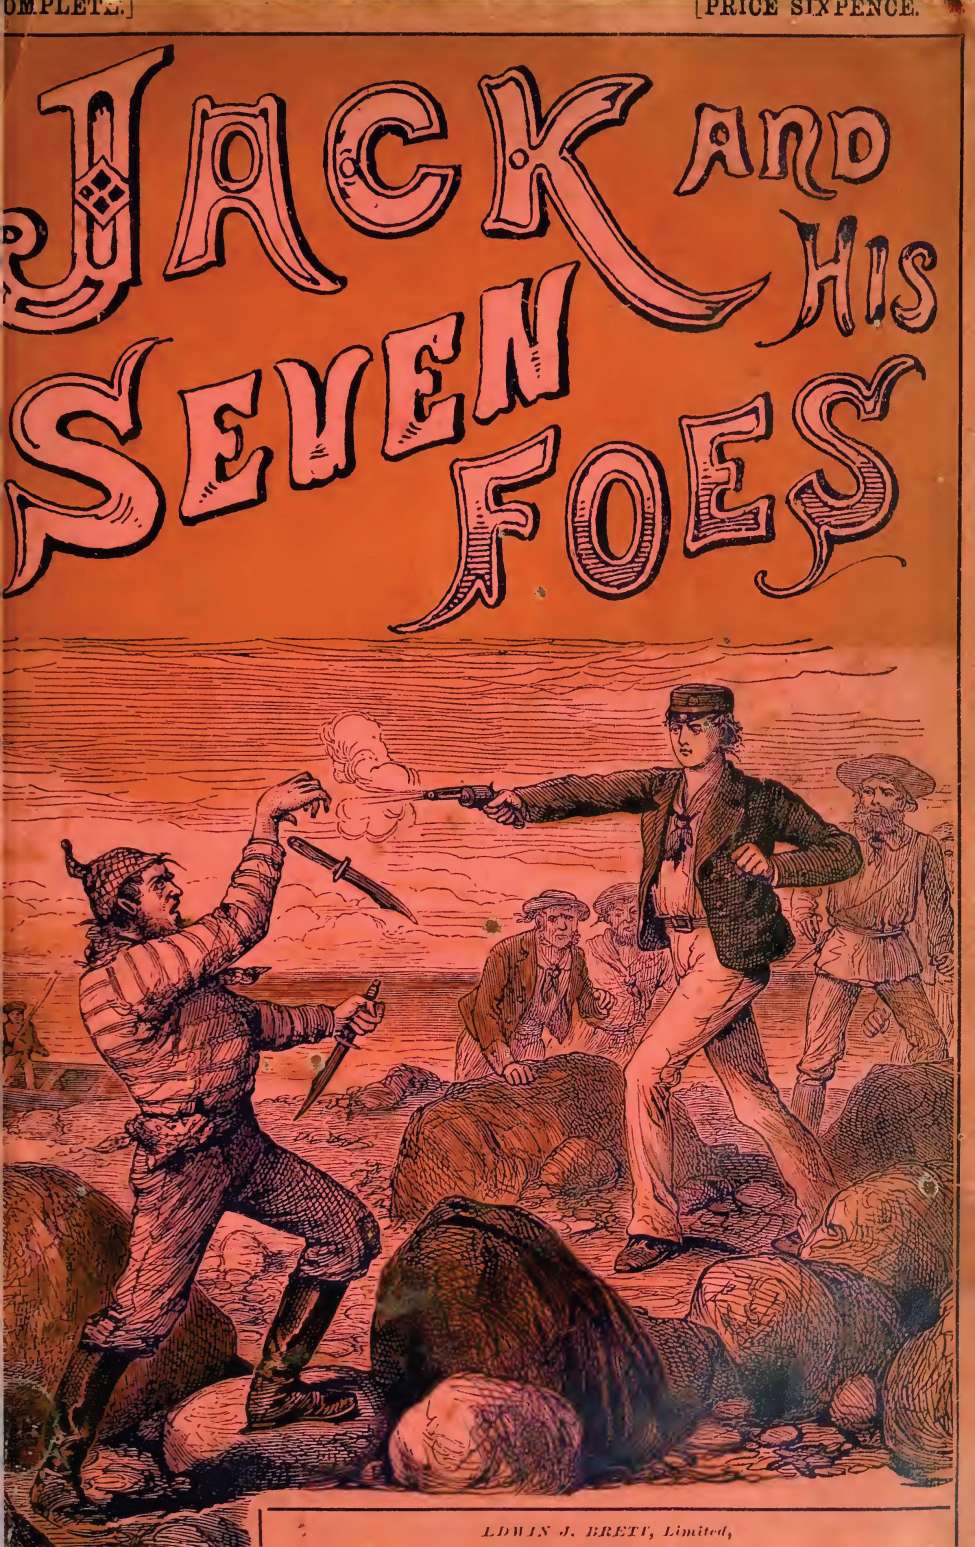 Comic Book Cover For Jack and His Seven Foes